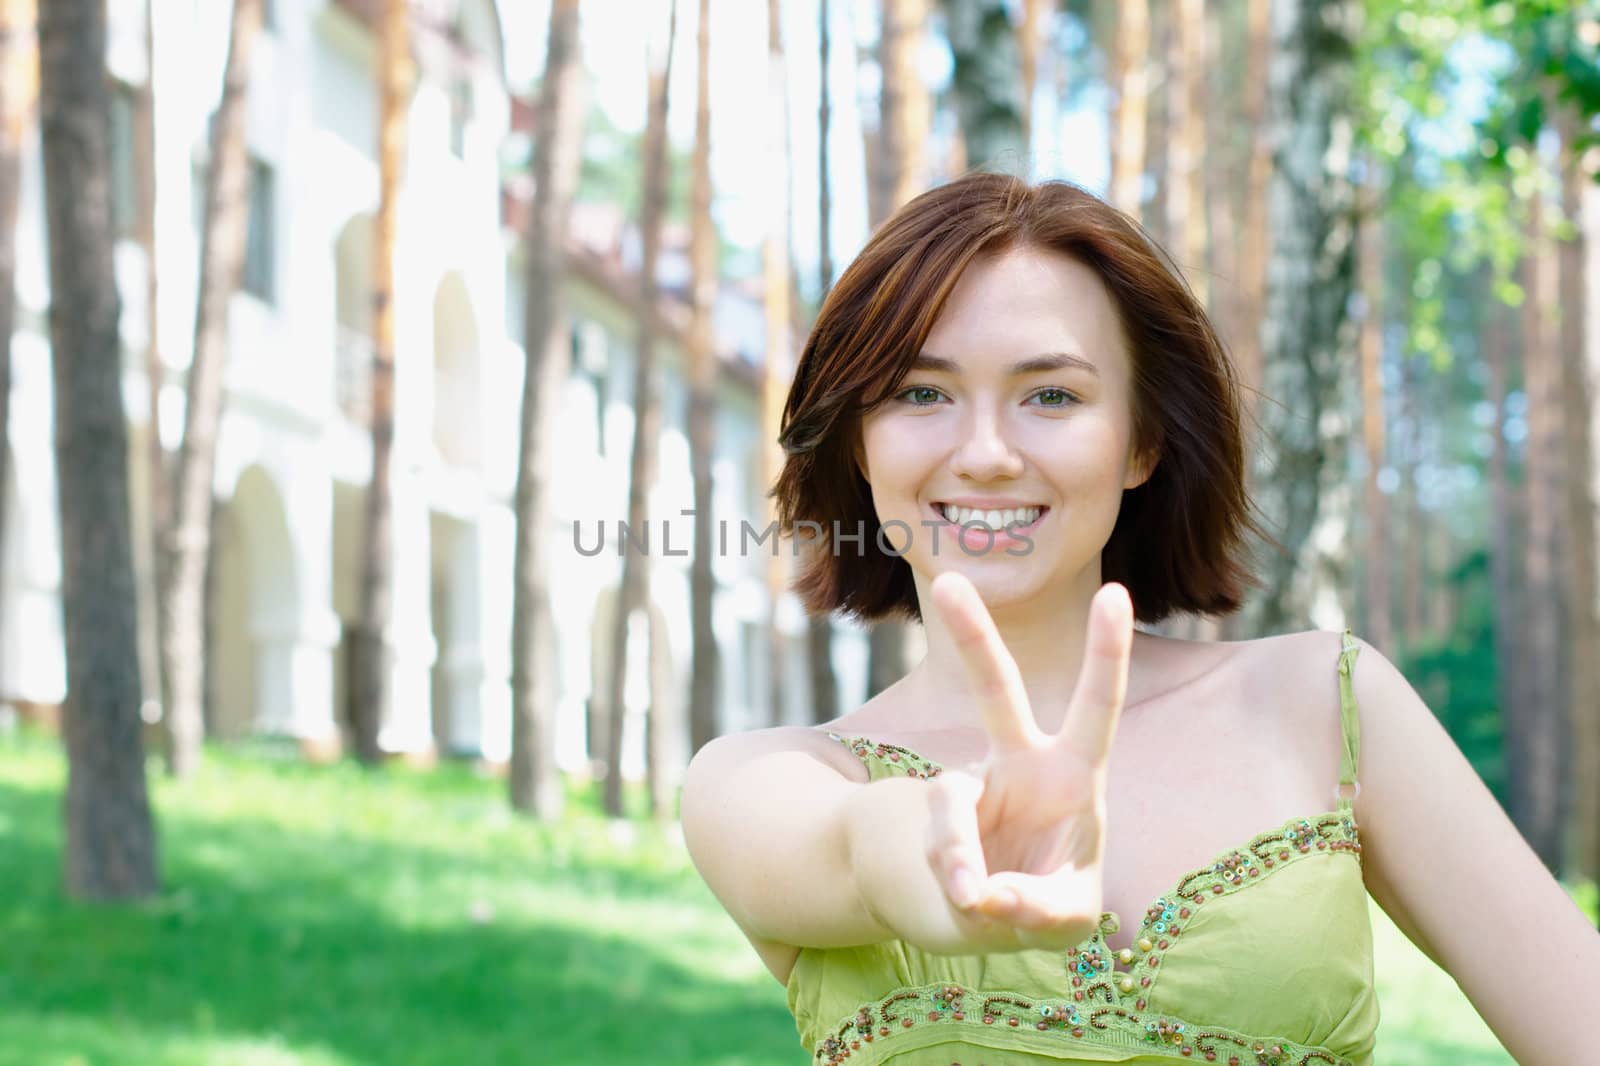 Close-up portrait of a girl with a victory sign